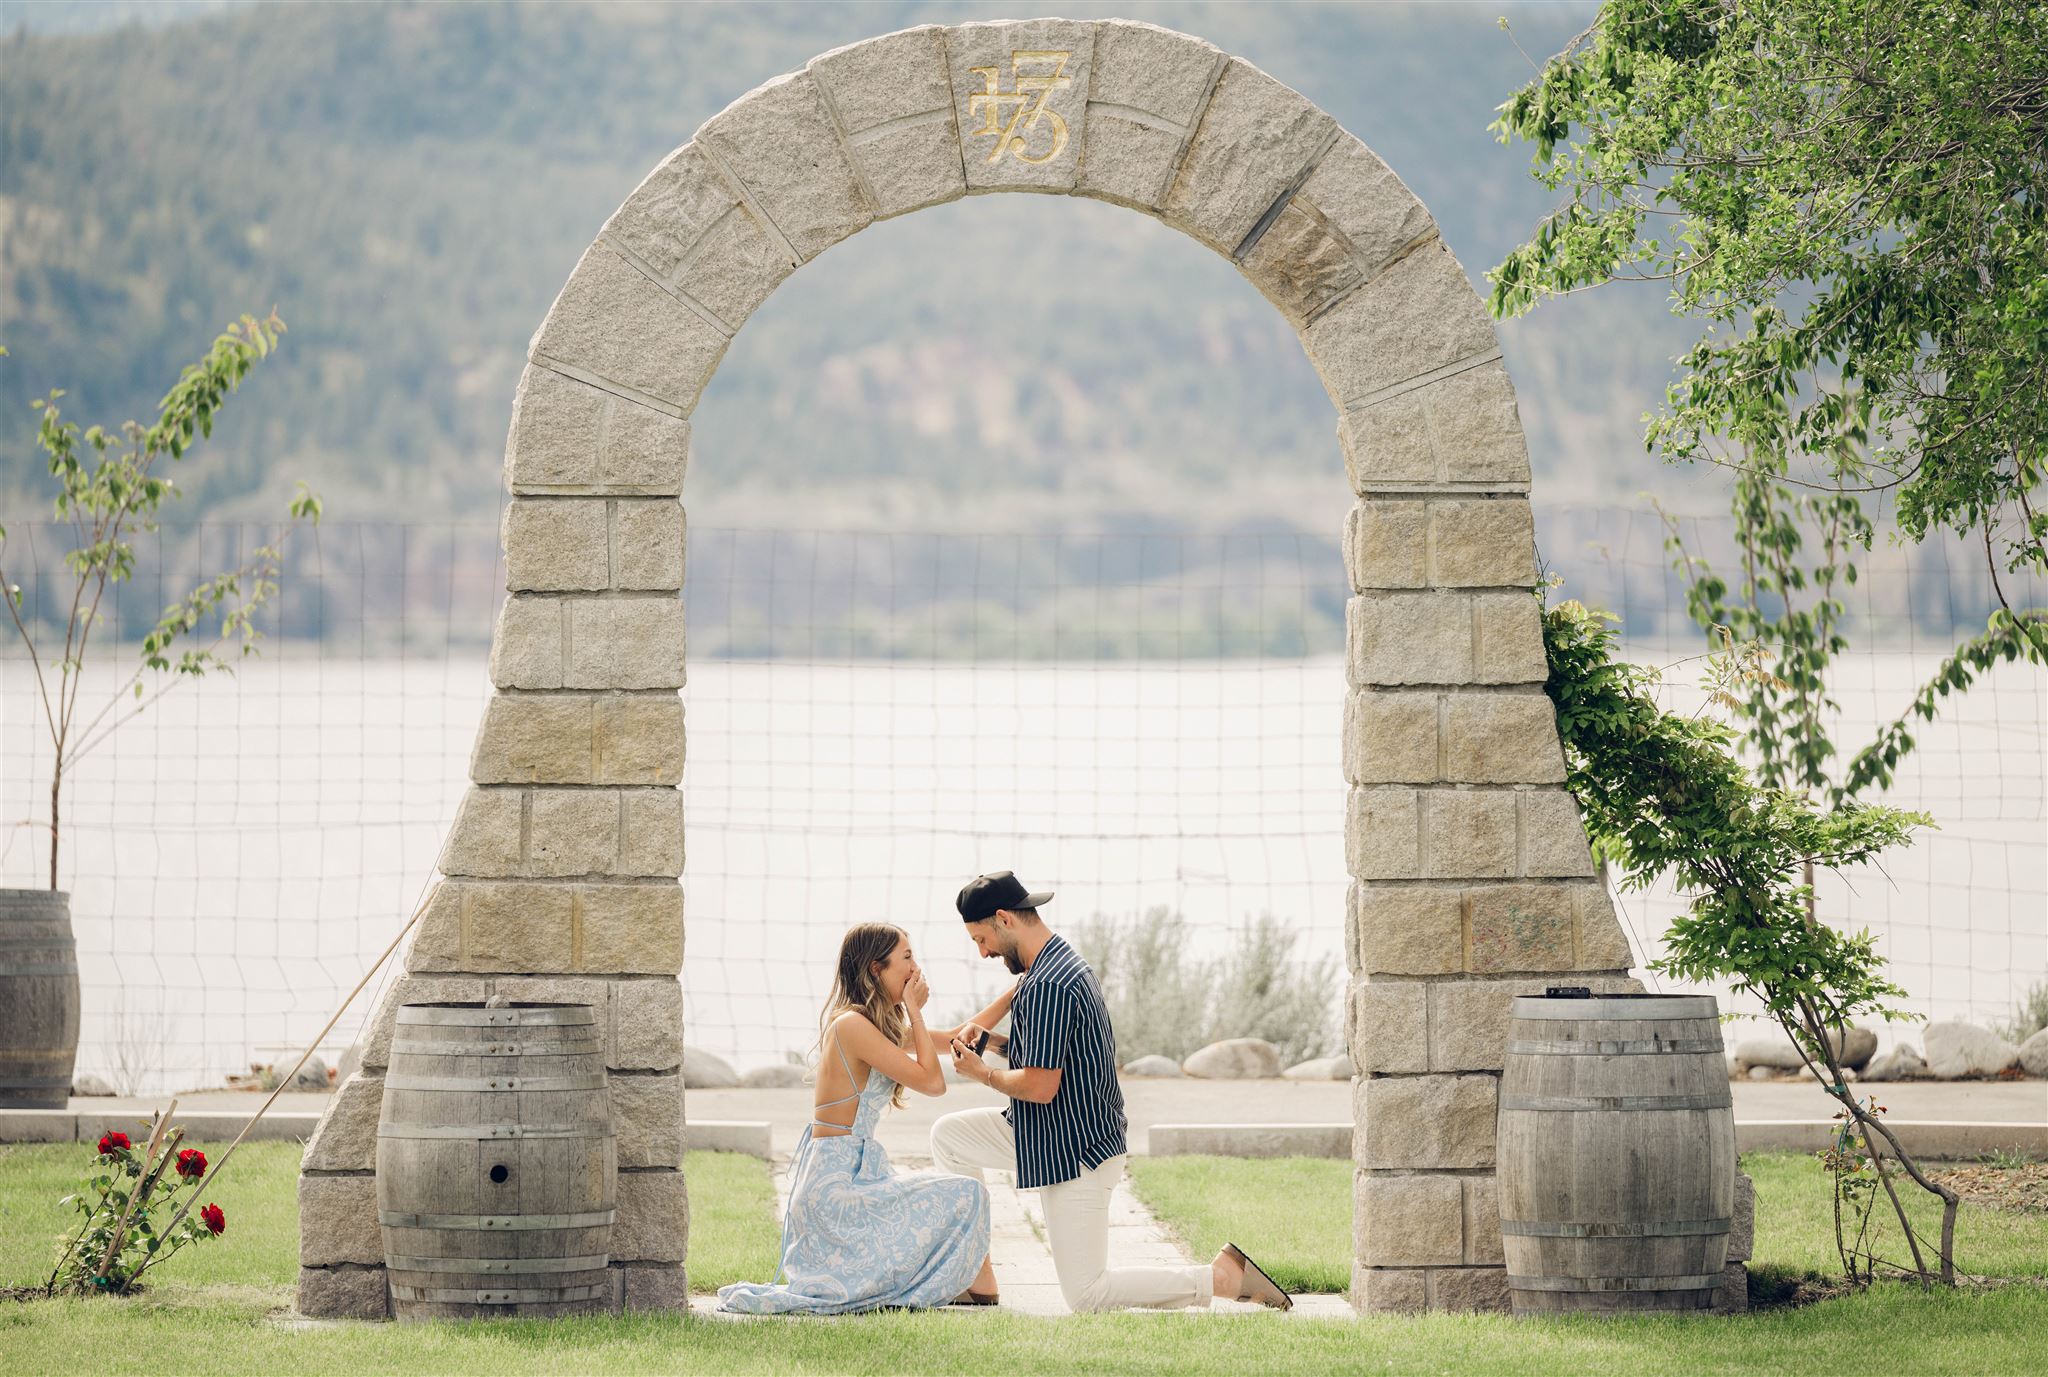 surprise marriage proposal, a man proposing to a woman in front of a stone arch with the lake and mountains in the background